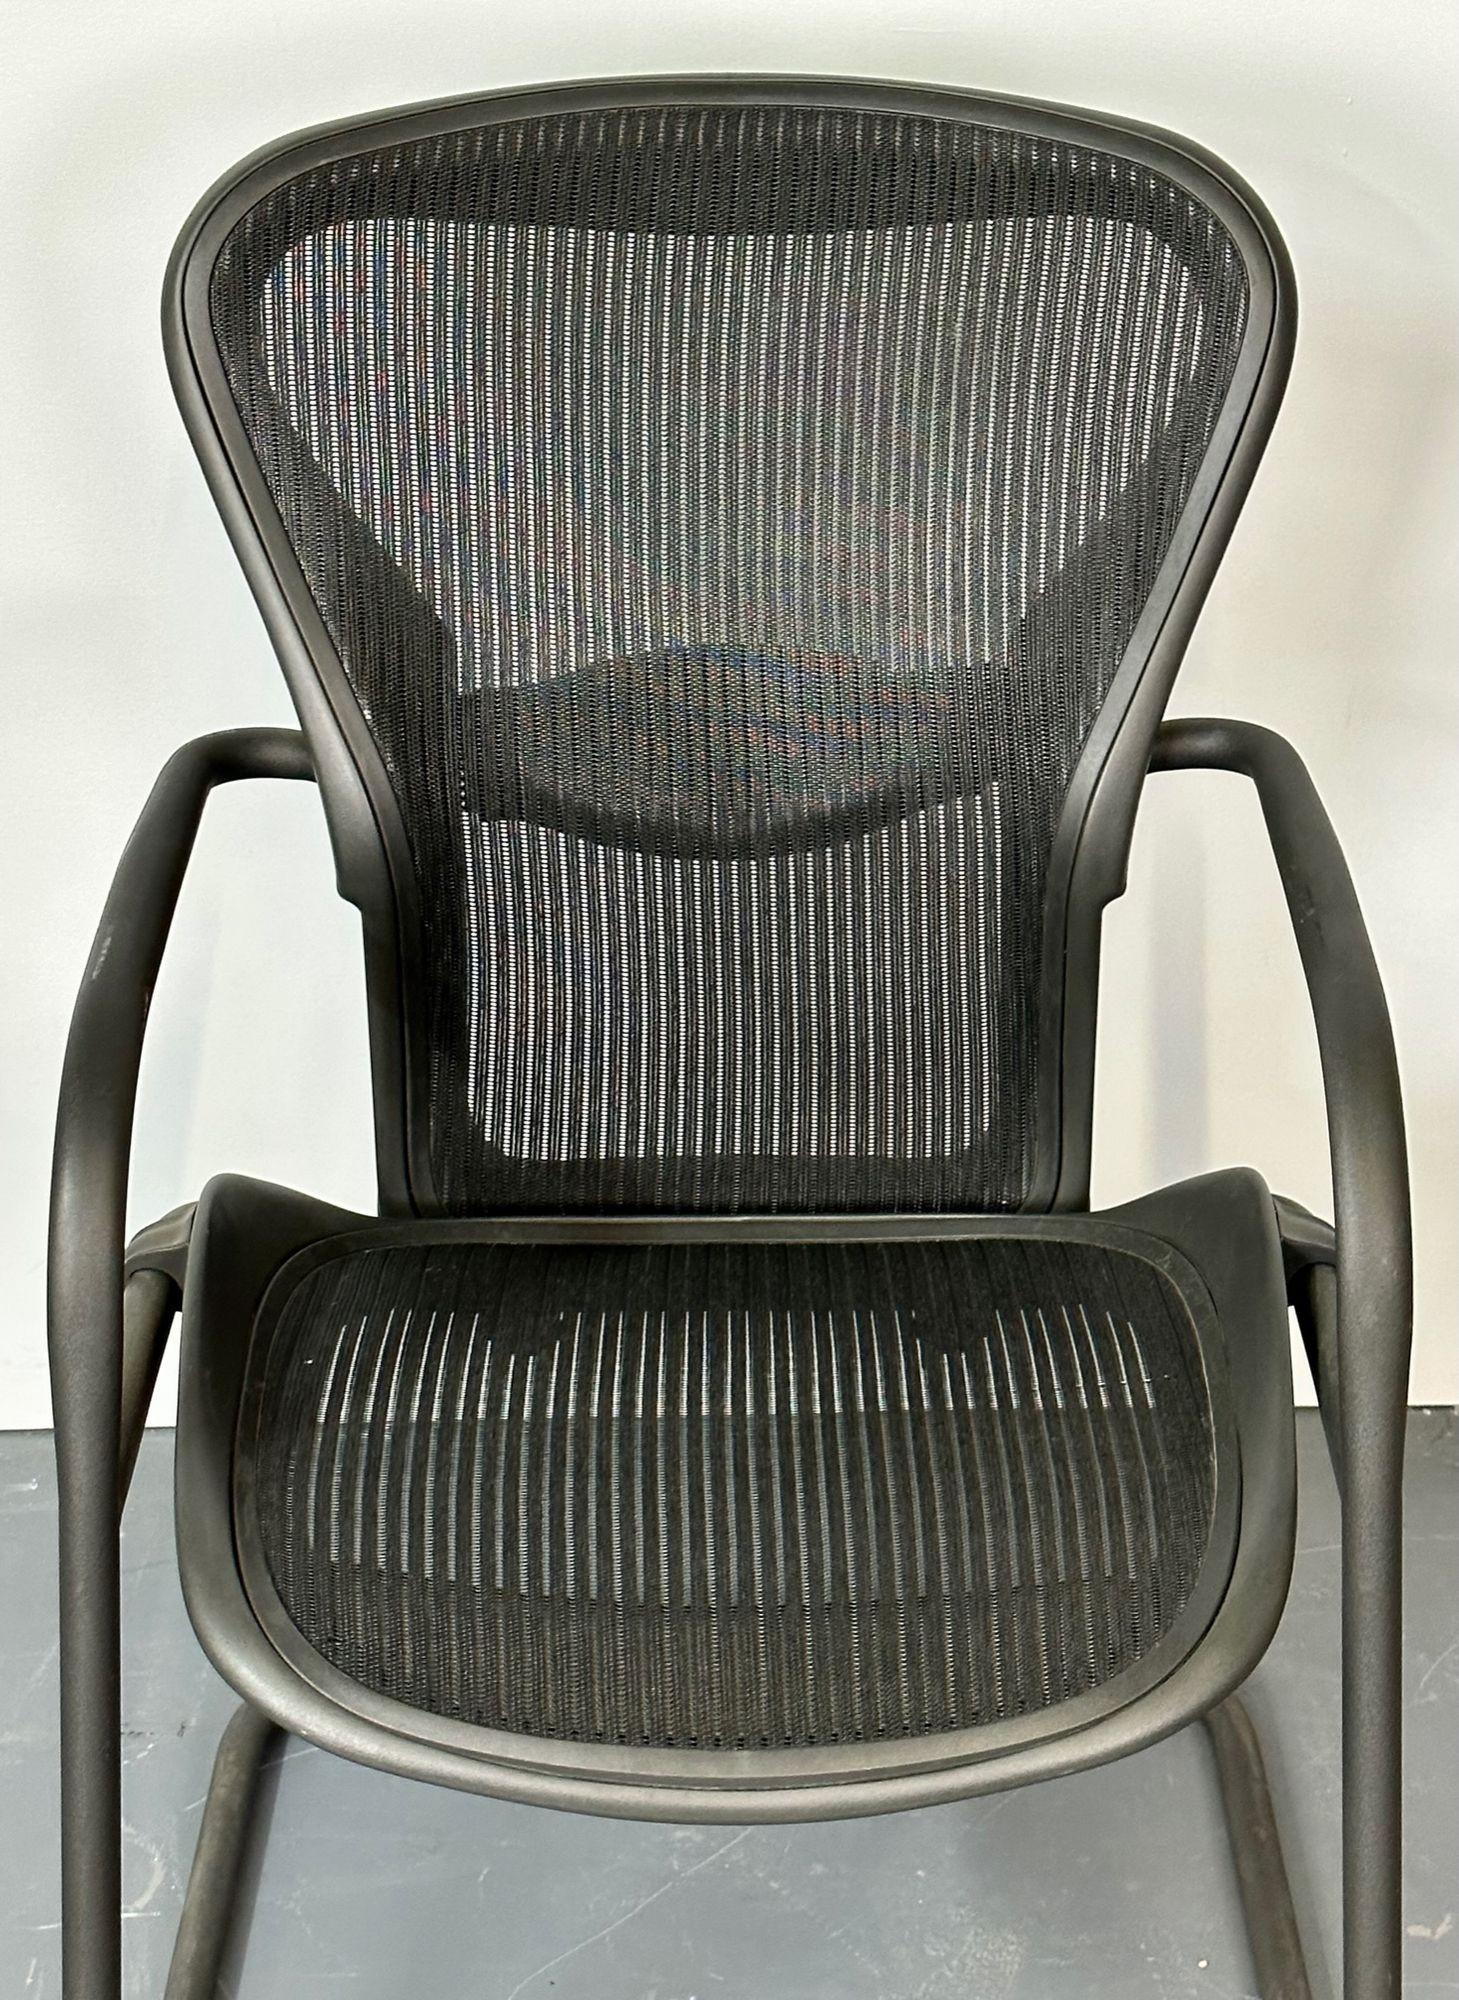 Late 20th Century Pair of Stamped Herman Miller Mid-Century Modern Desk / Office Chairs, Aluminum